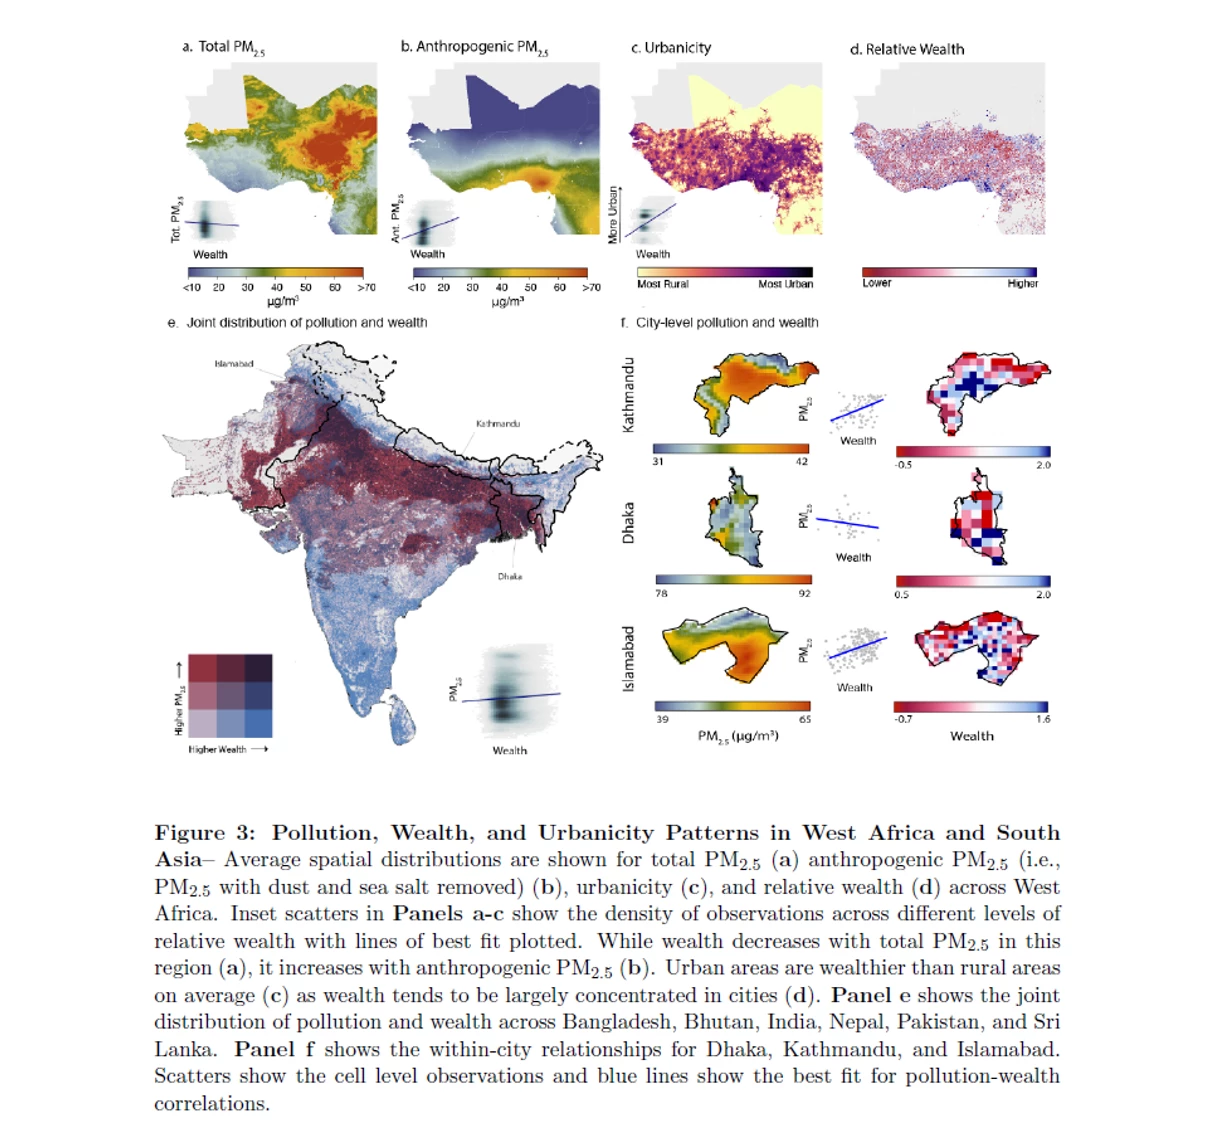 Collections of maps showing Figure 3: Pollution, Wealth and Urbanicity Patterns in West Africa and South Asia